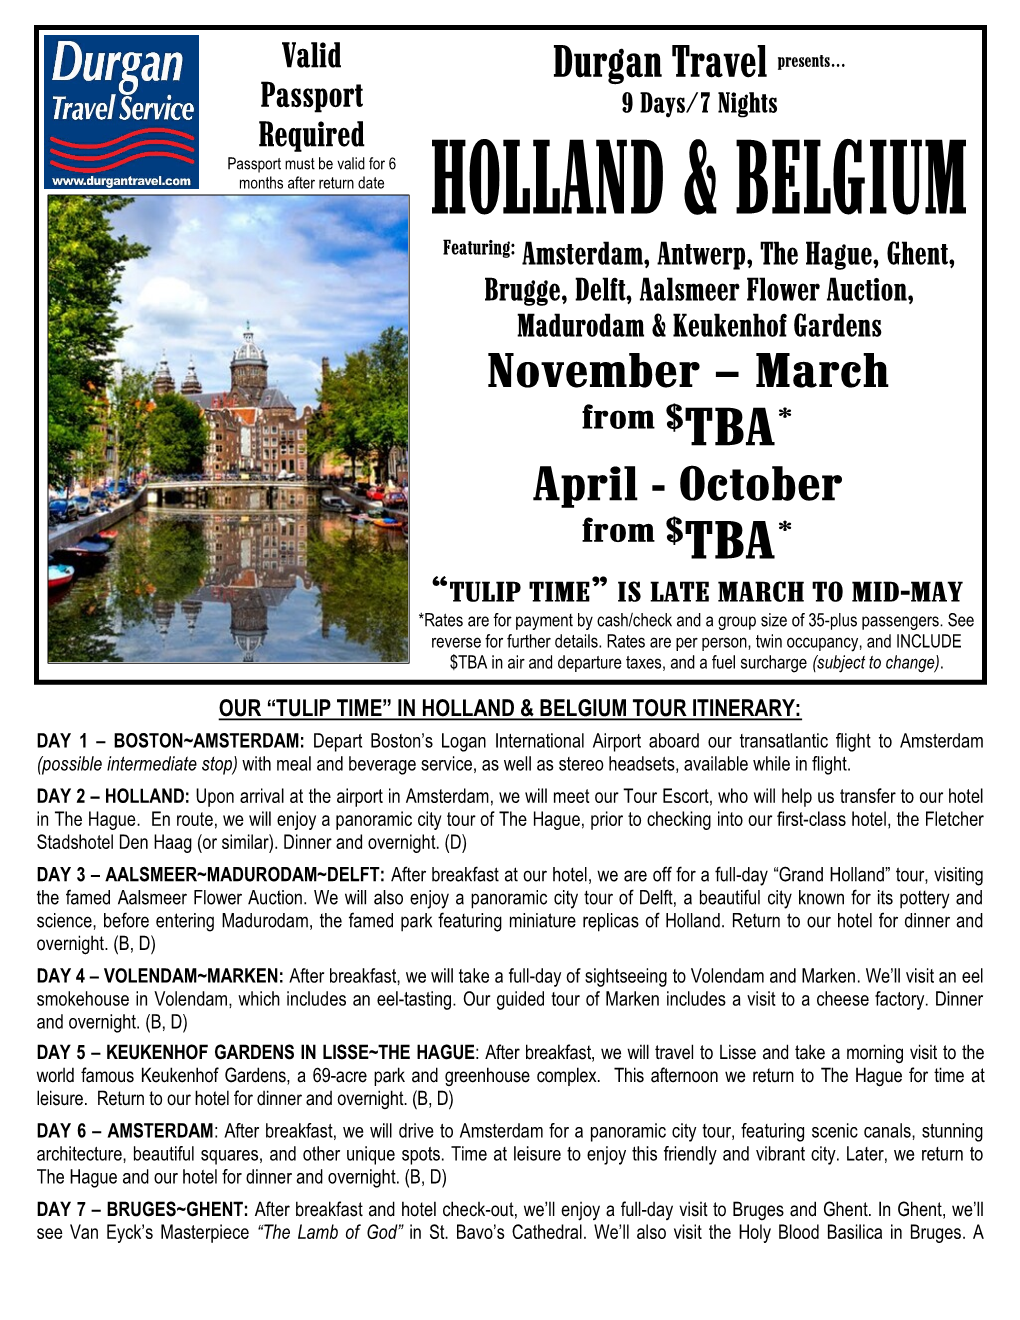 Our “Tulip Time” in Holland & Belgium Tour Itinerary